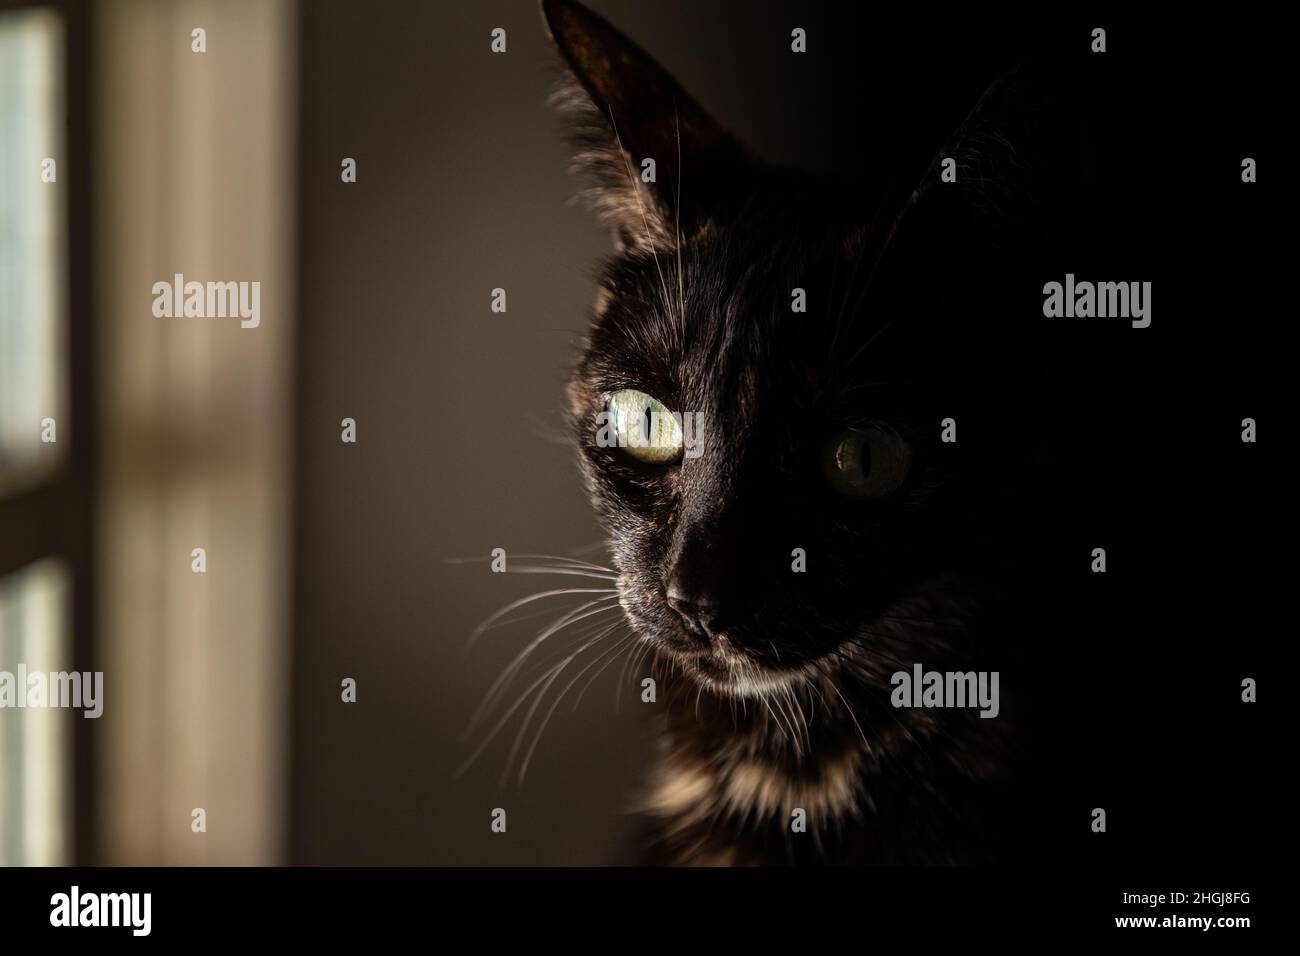 Goiânia, Goias, Brazil – January 21, 2022: A Carey the cat sitting by a window, half of her face lit up and half of her face dark. Stock Photo